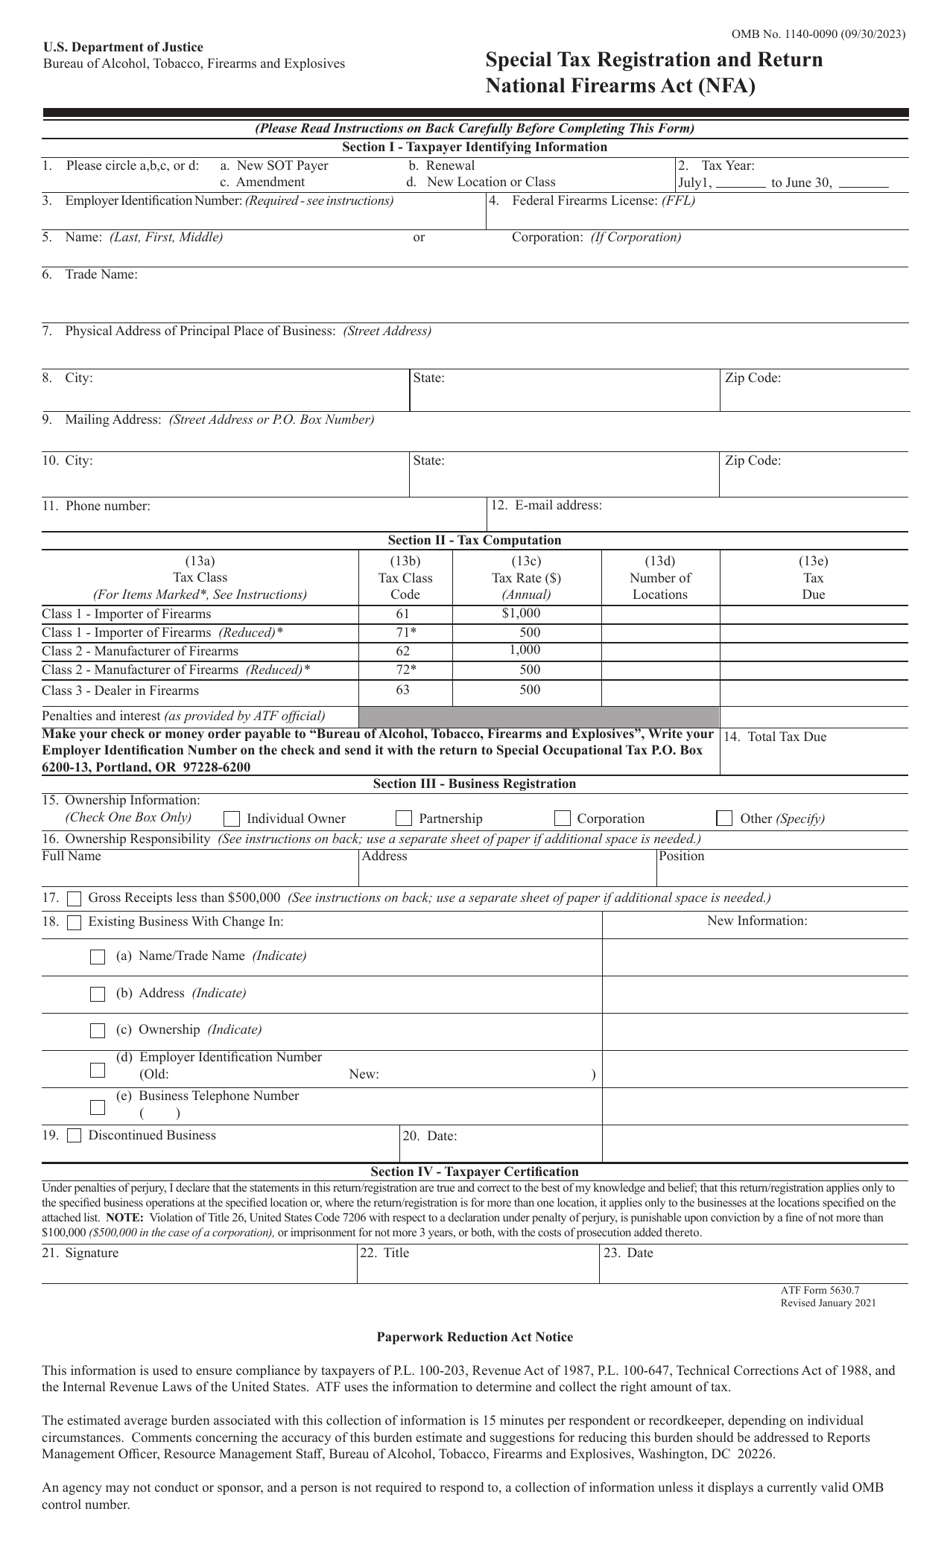 atf-form-5630-7-download-fillable-pdf-or-fill-online-special-tax